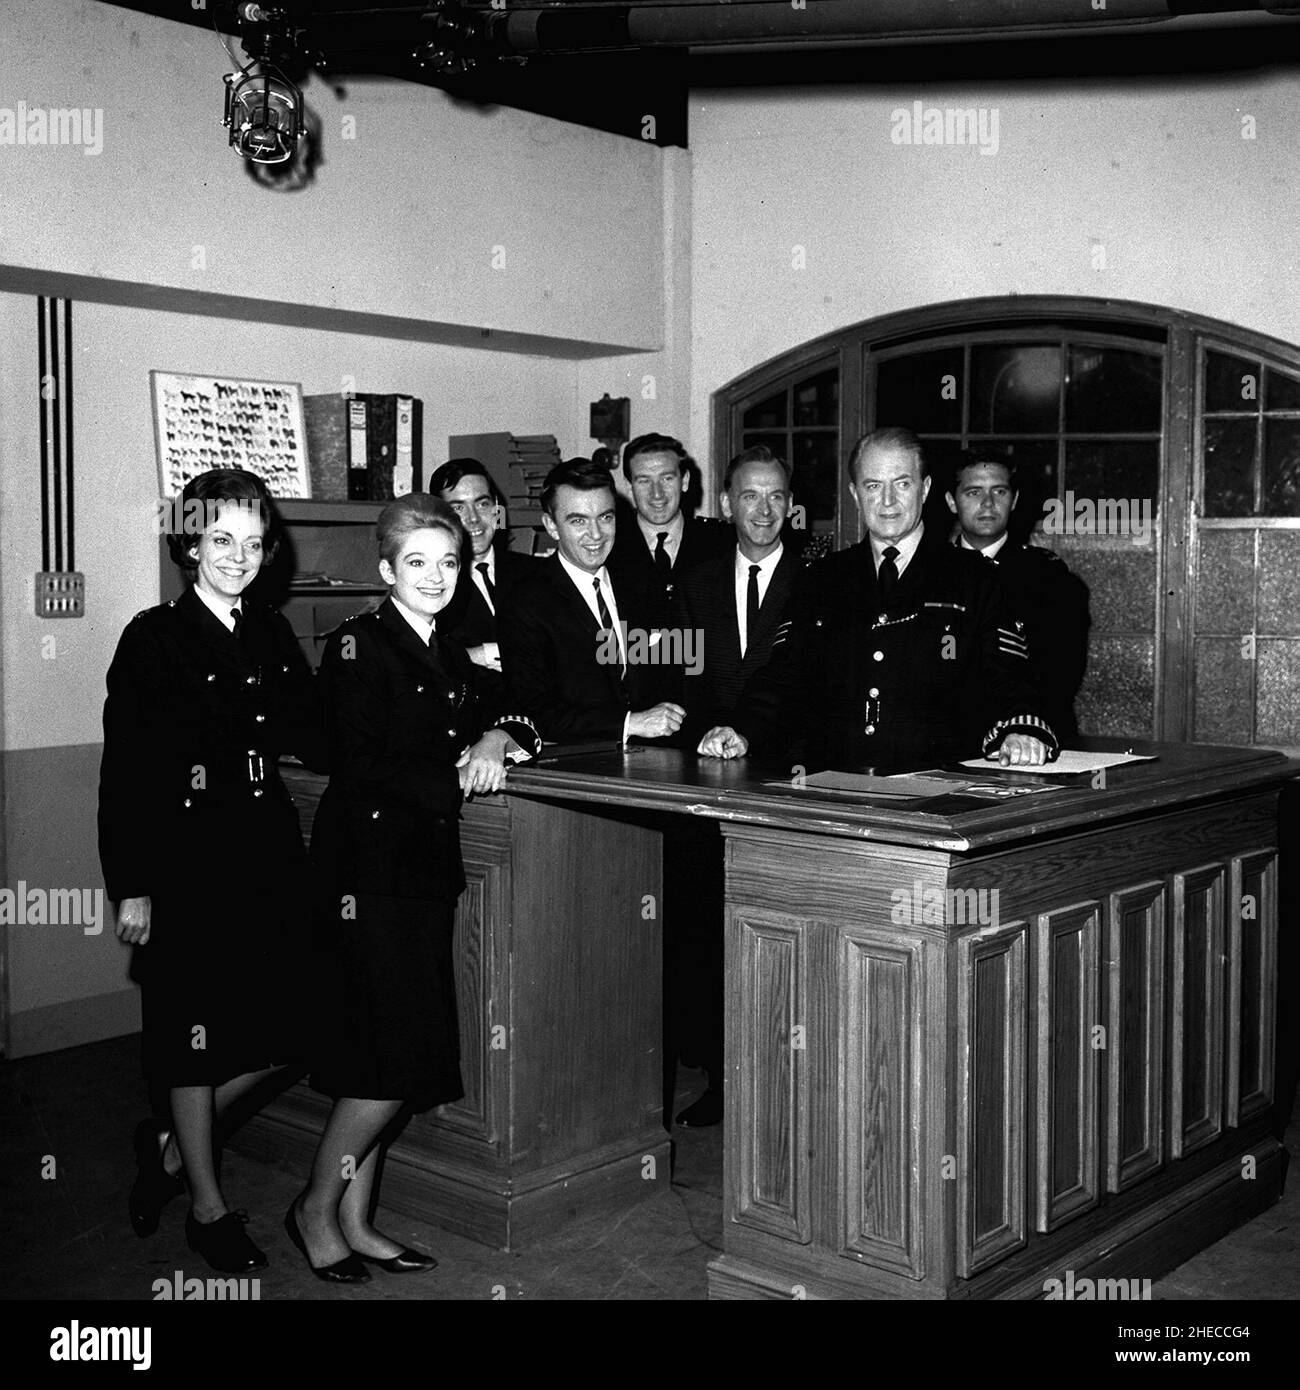 1966 file photo of Nicholas Donnelly, who has died aged 83, with the the cast of the BBC series 'Dixon of Dock Green,' from left, Jean Dallas, Anne Carroll, Joe Dunlop, Peter Byrne, Nicholas Donnelly, Geoffery Adams, Jack Warner (Dixon) and Ronald Bridges. As well as appearing as Sergeant Johnny Wills in around 200 episodes, he played teacher Mr MacKenzie in Grange Hill for around eight years of the TV show. Stock Photo